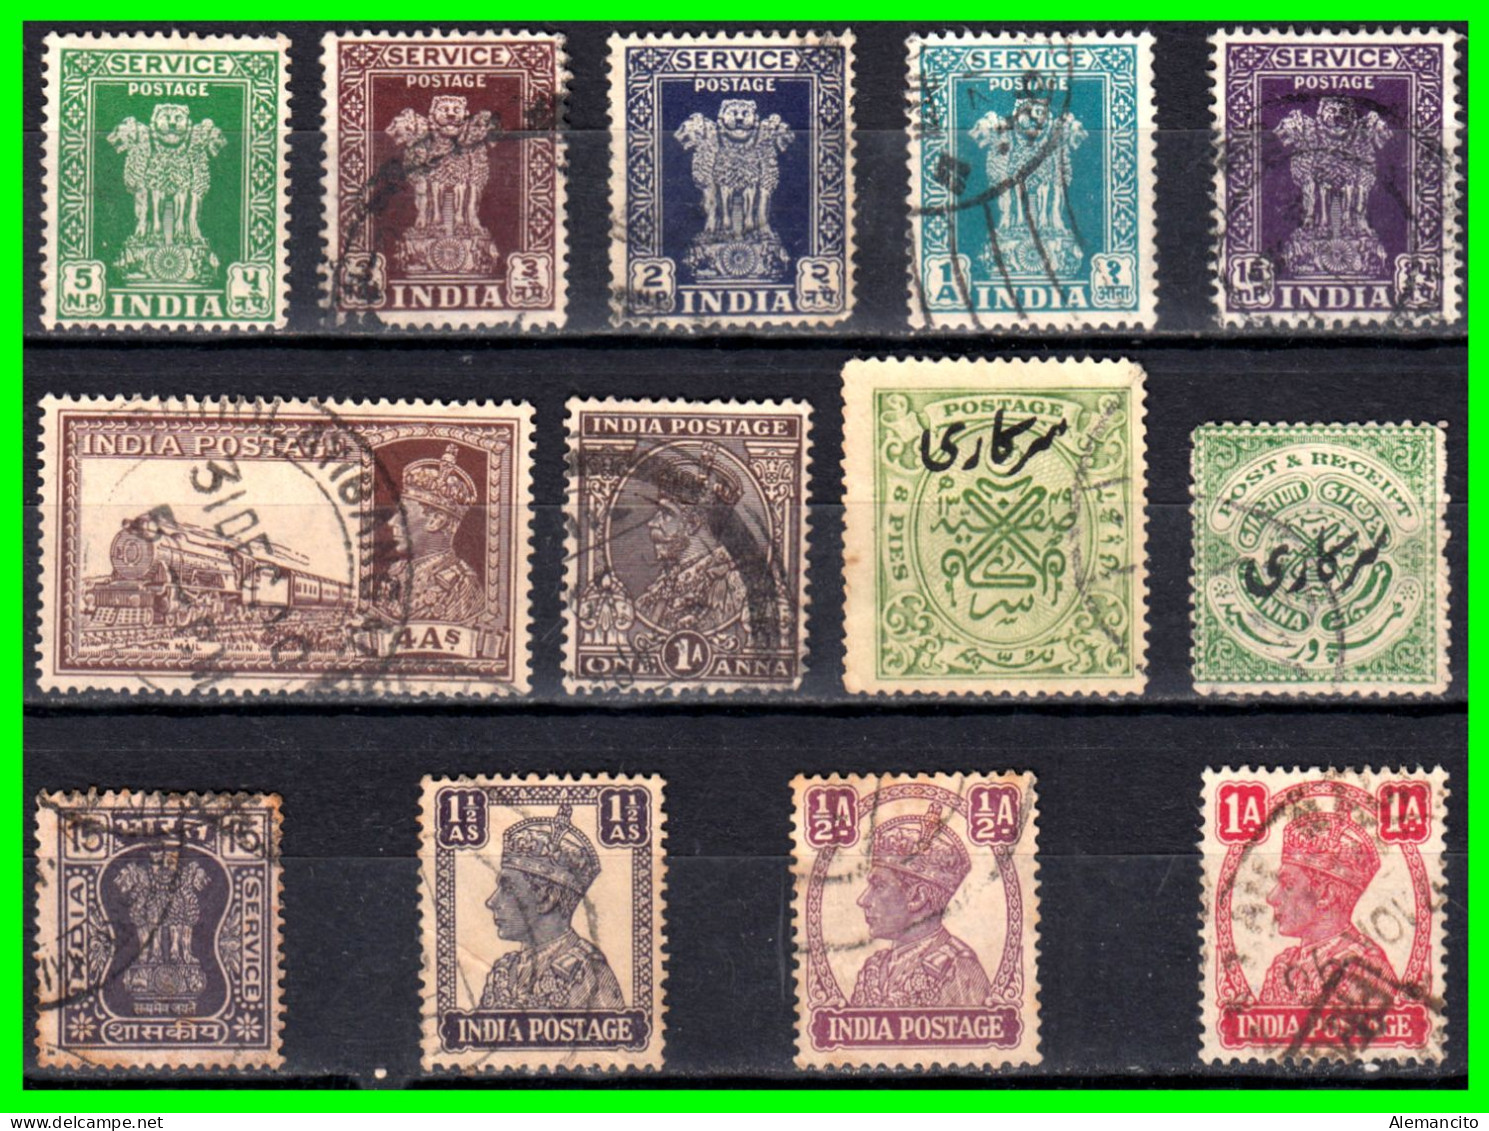 INDIA – ( ASIA ) – LOTE 12 SELLOS DIFERENTES AÑOS Y VALORES - Used Stamps